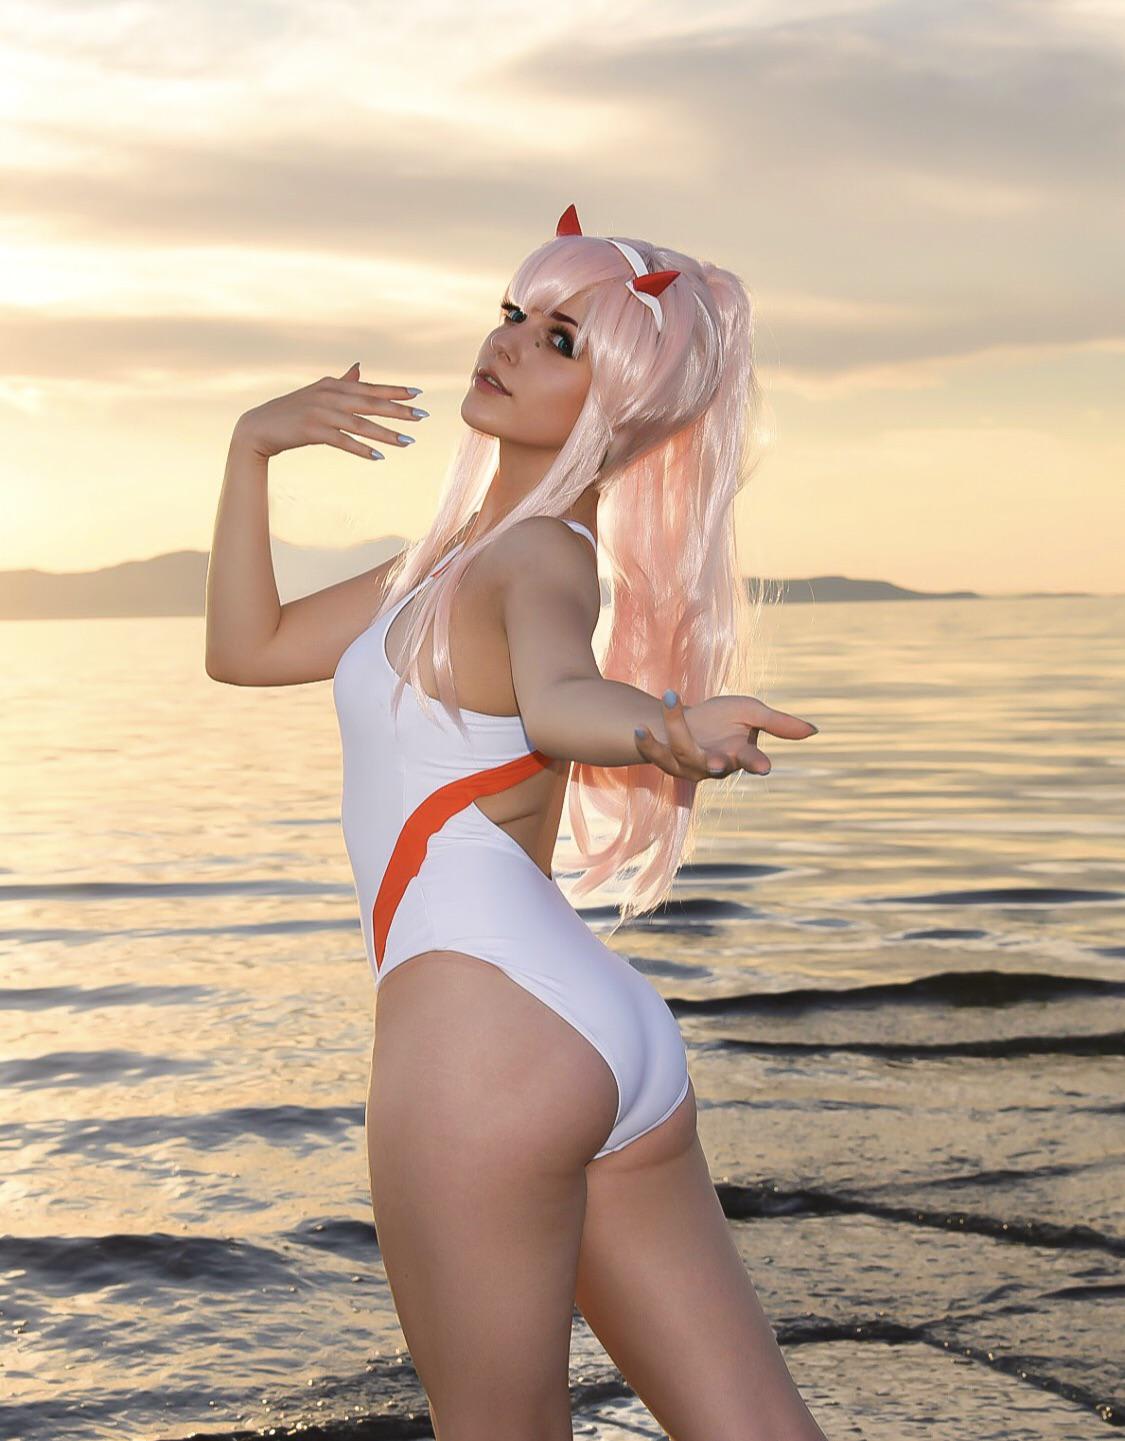 [self] cosplaying zero two from darling in the franxxs beach episode taken at the great saltair